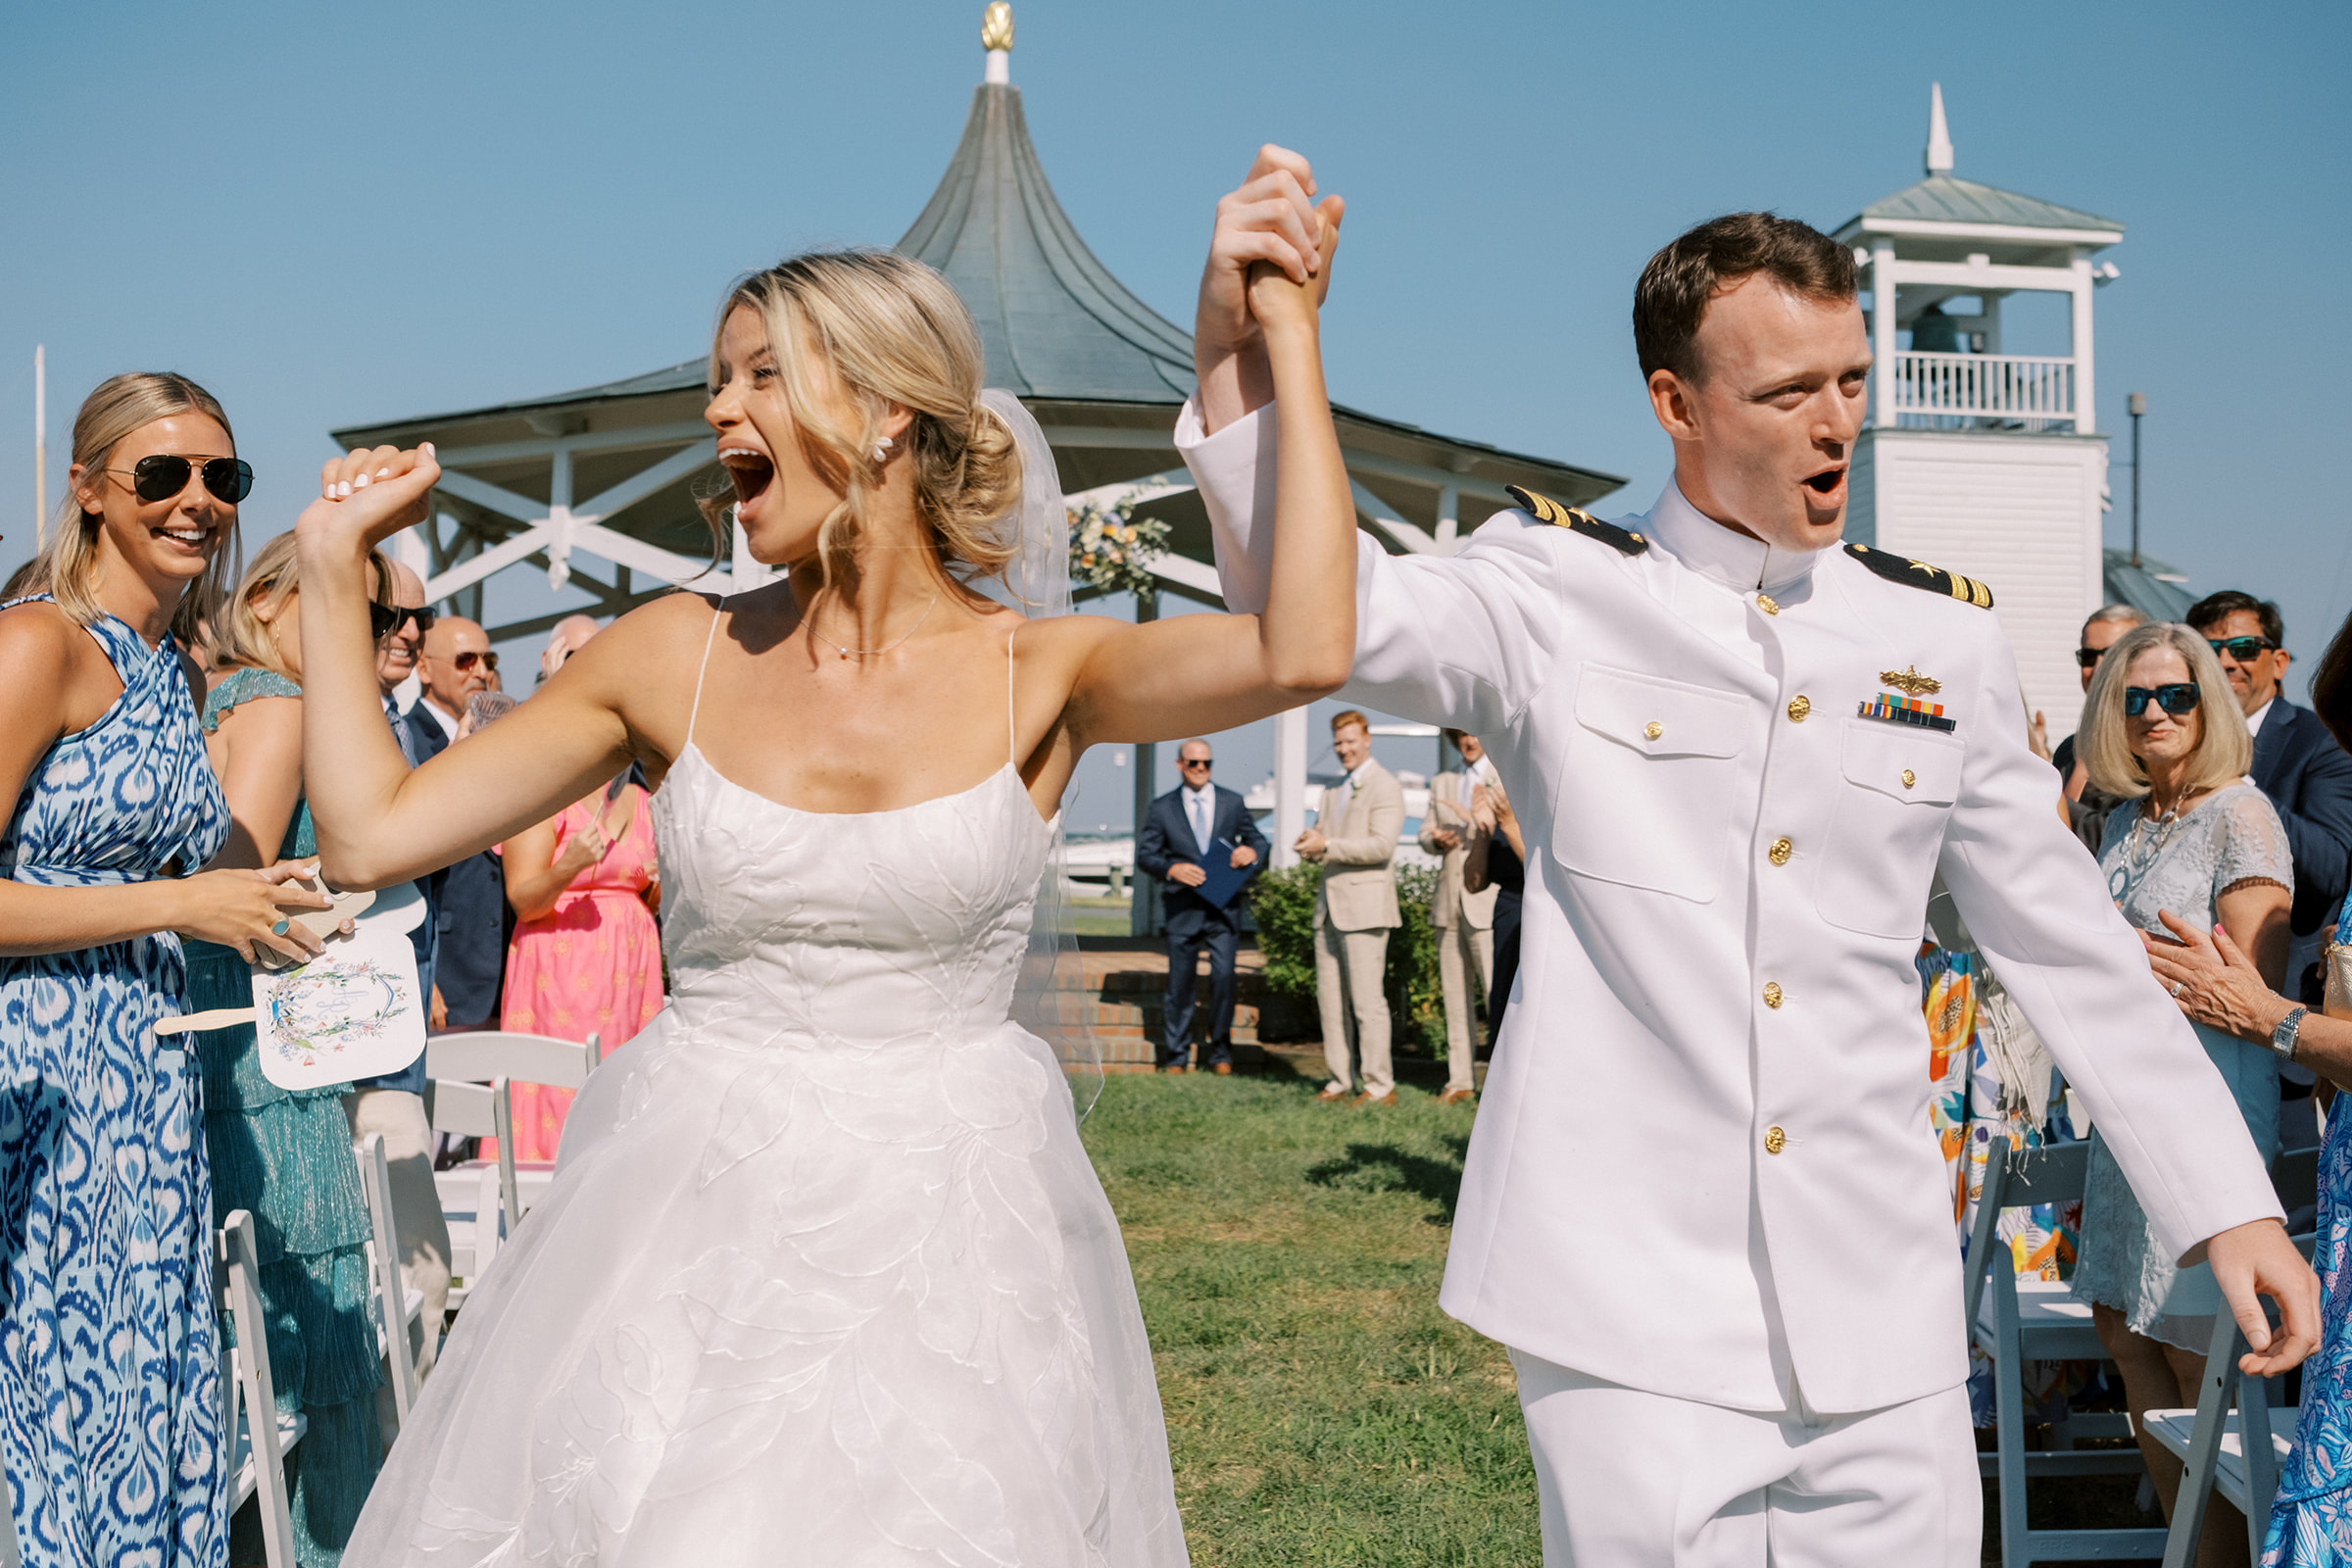 Bride and groom celebrate walking back up the aisle in Saint Michaels wedding